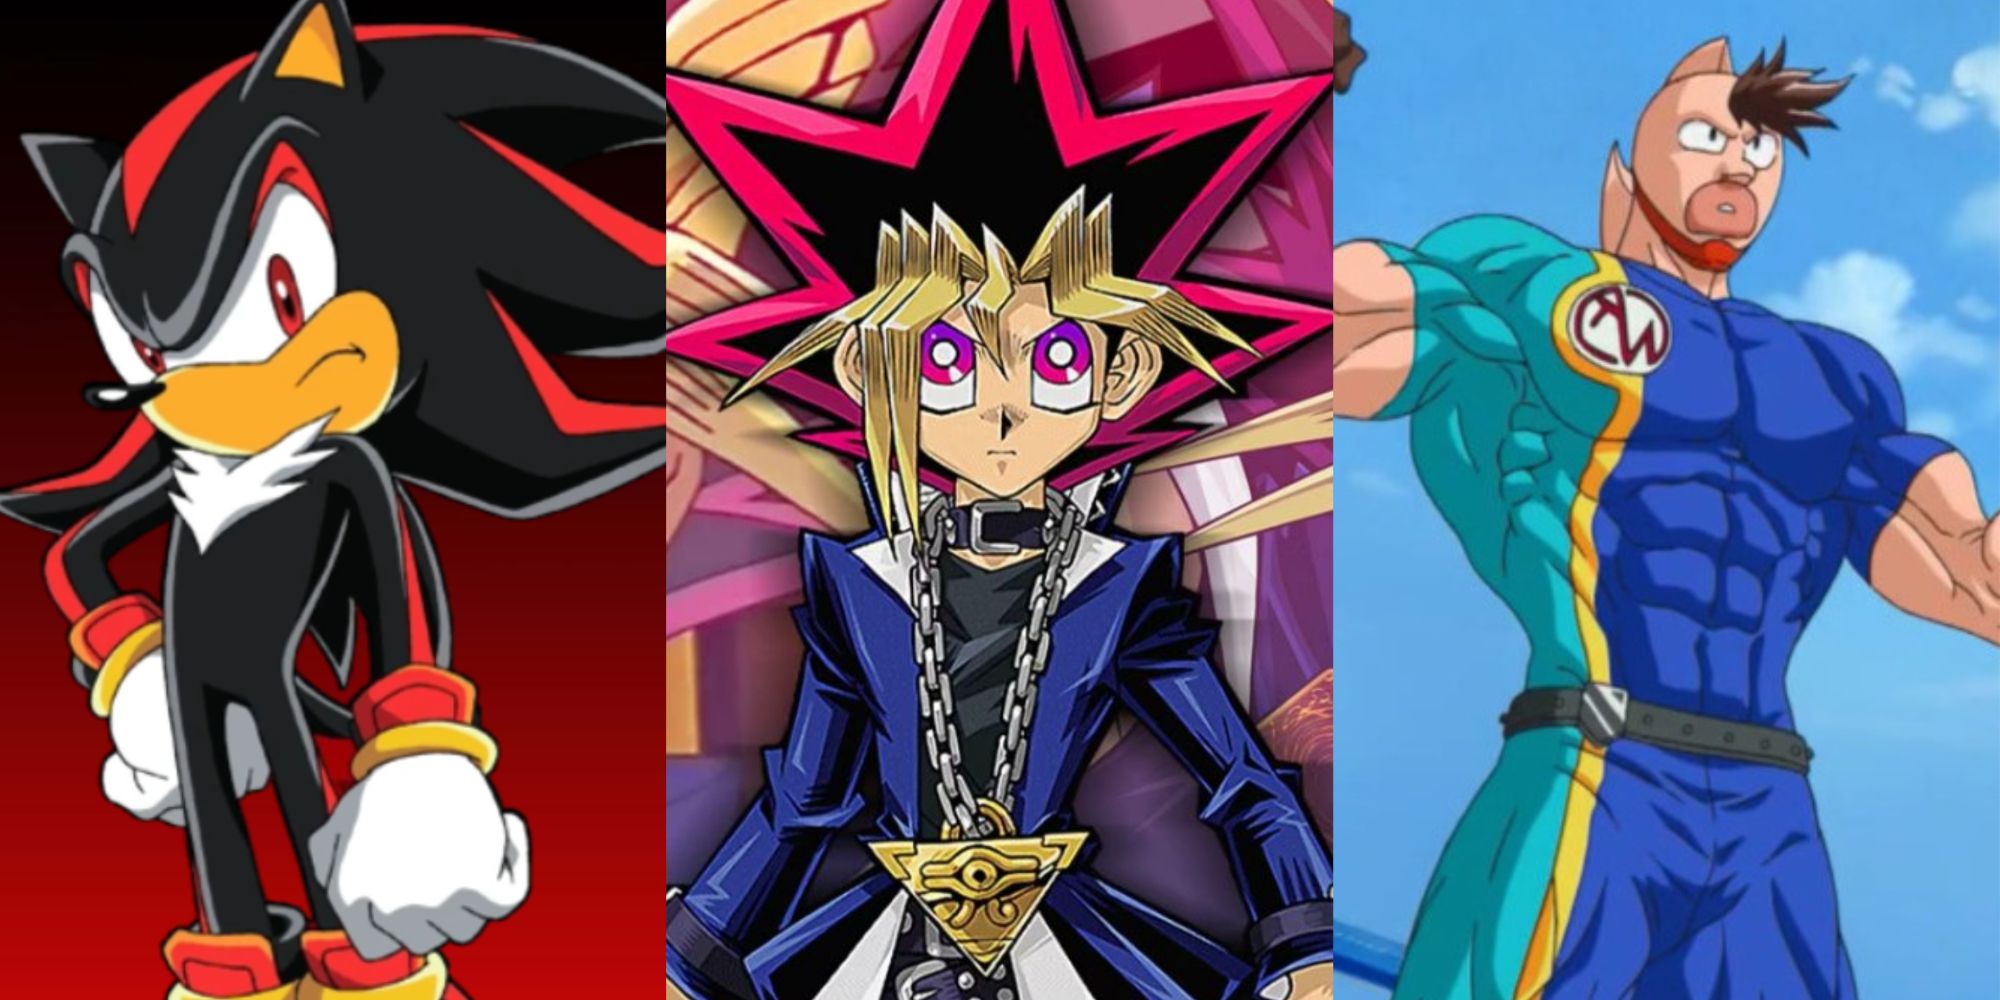 Shadow, Yugi, and Montaro Muscle from Sonic X, Yu-Gi-Oh!, and Ultimate Muscle, respectively